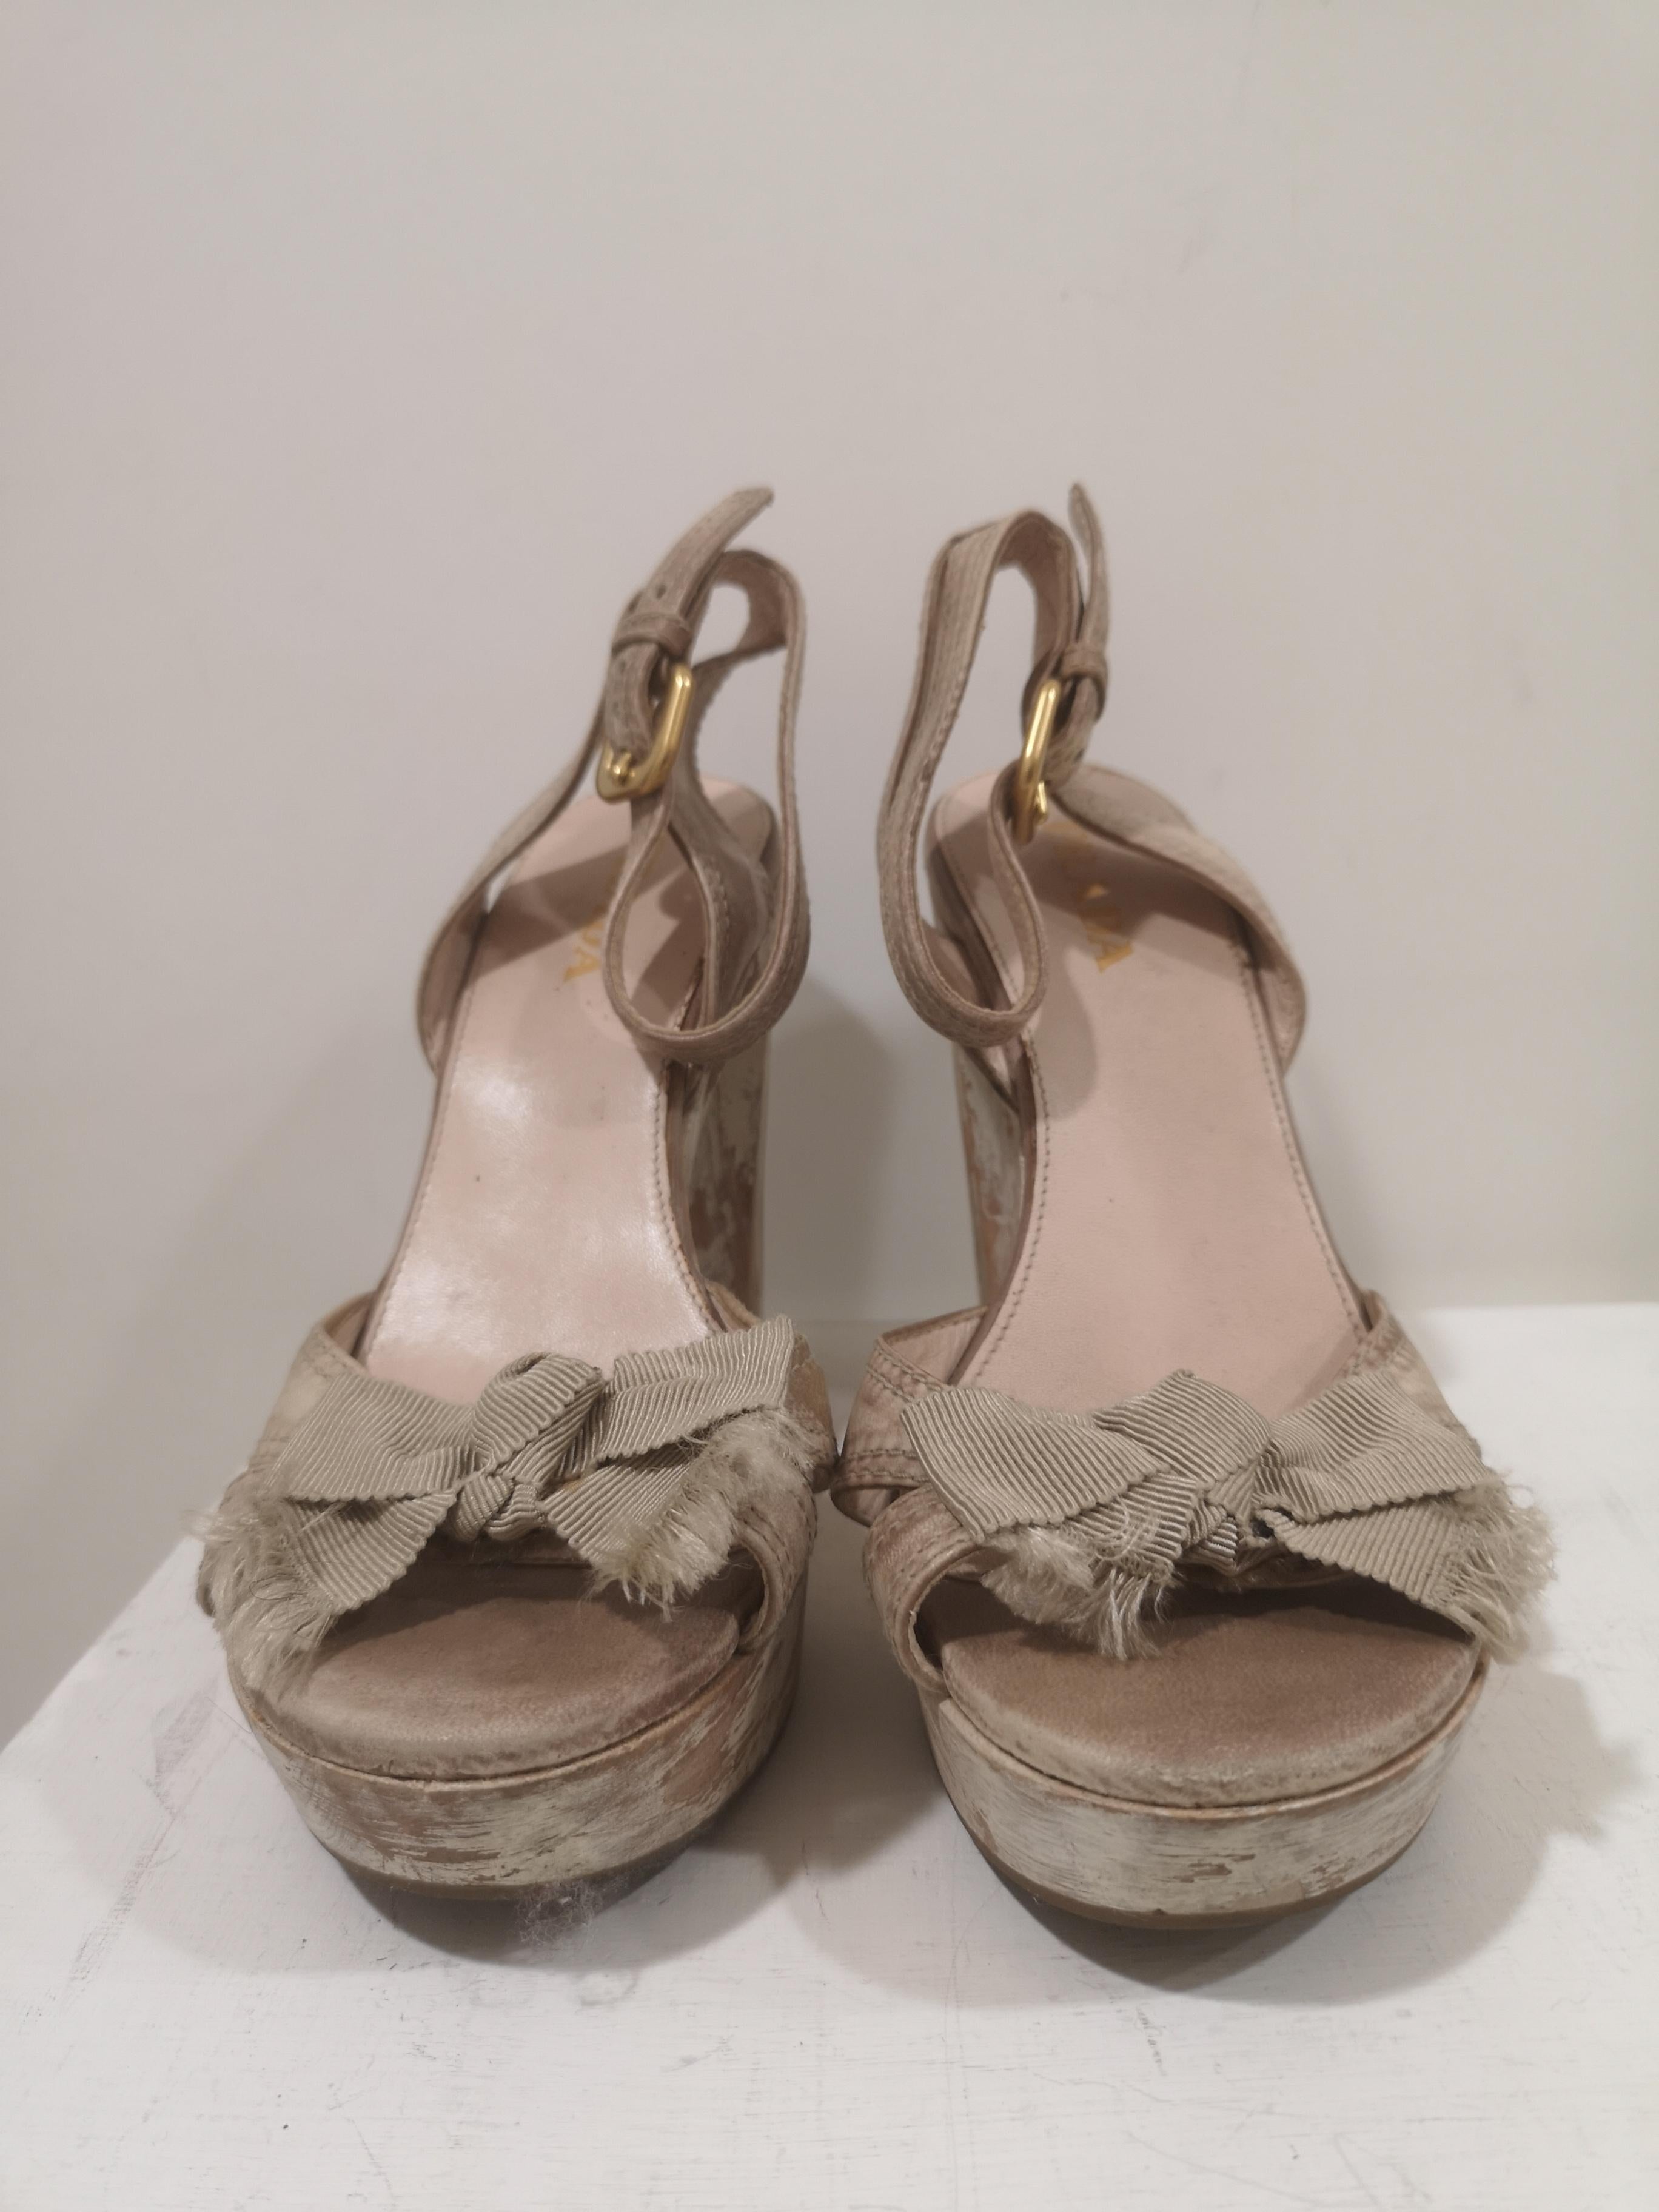 Prada nude sandals
totally made in Italy in size 36.5